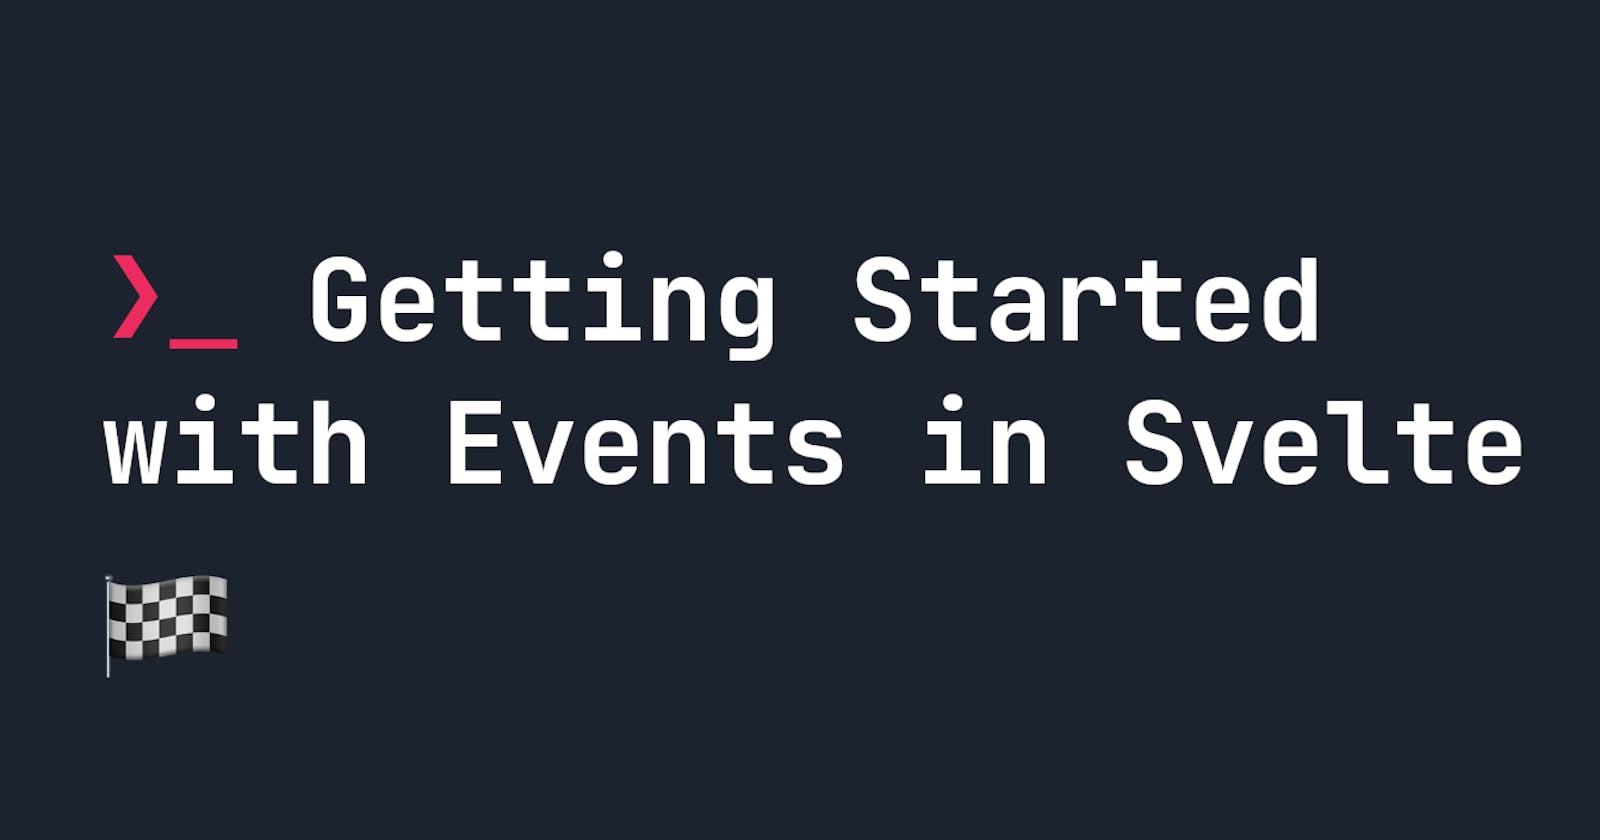 Getting Started with Events in Svelte